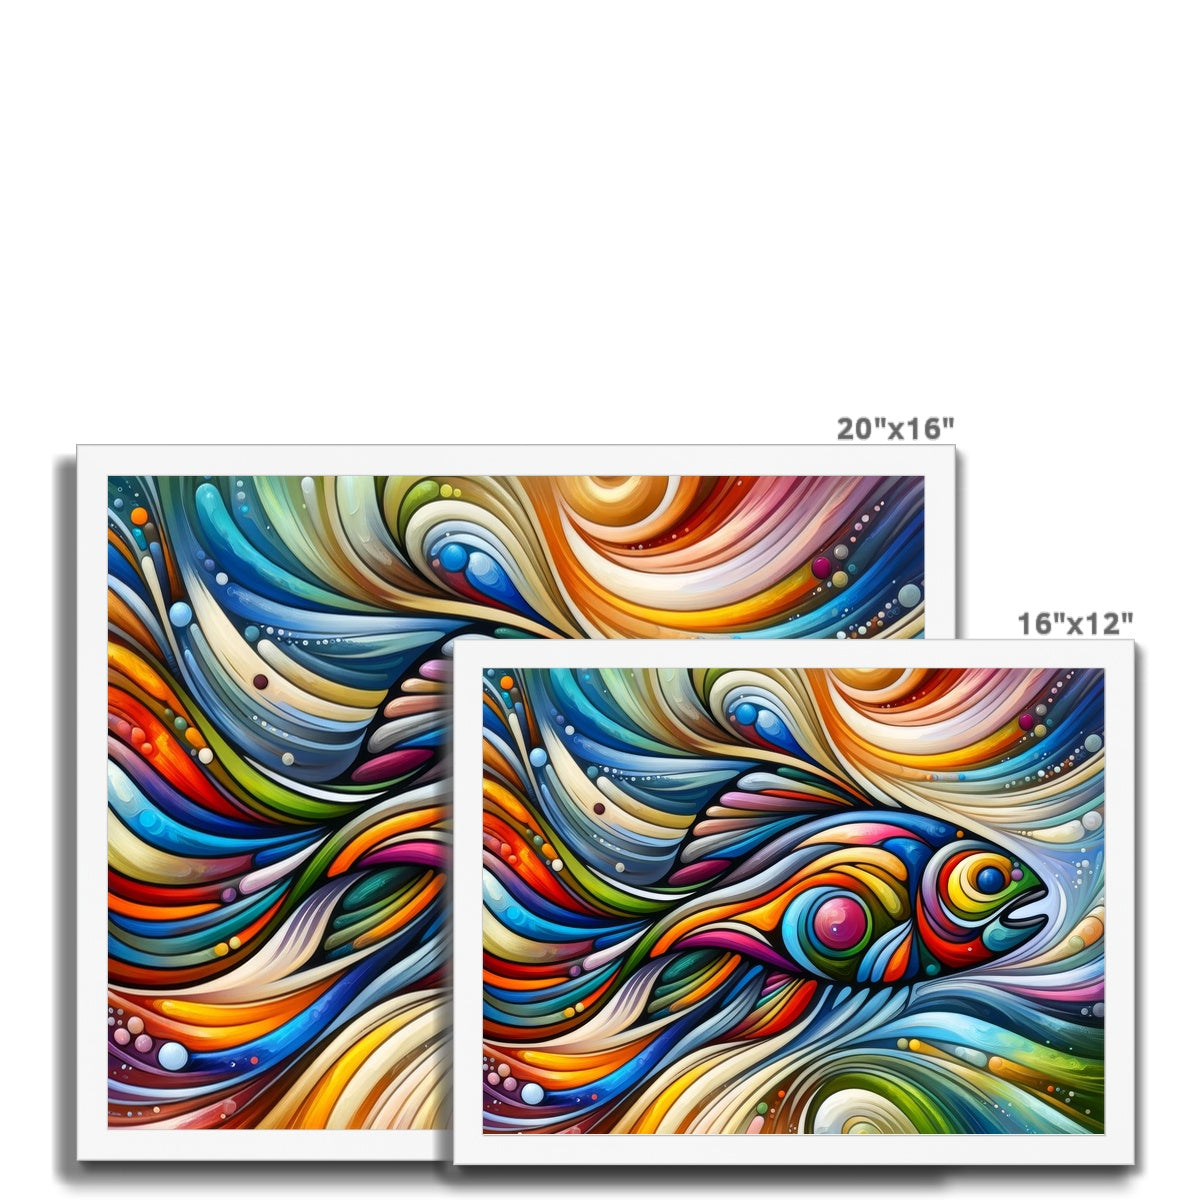 Trout Abstract Art | Framed Print